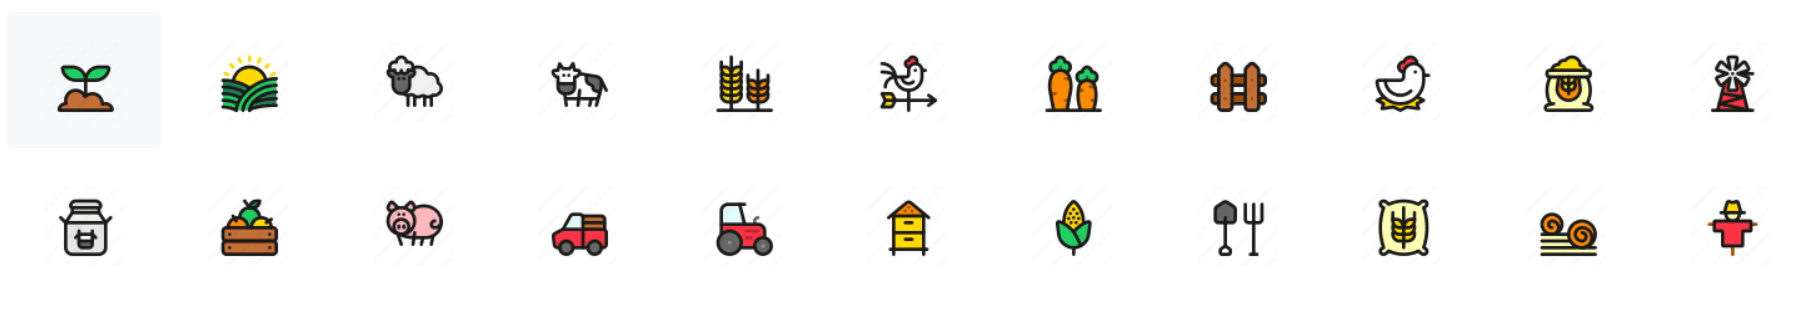 List of flat icons style